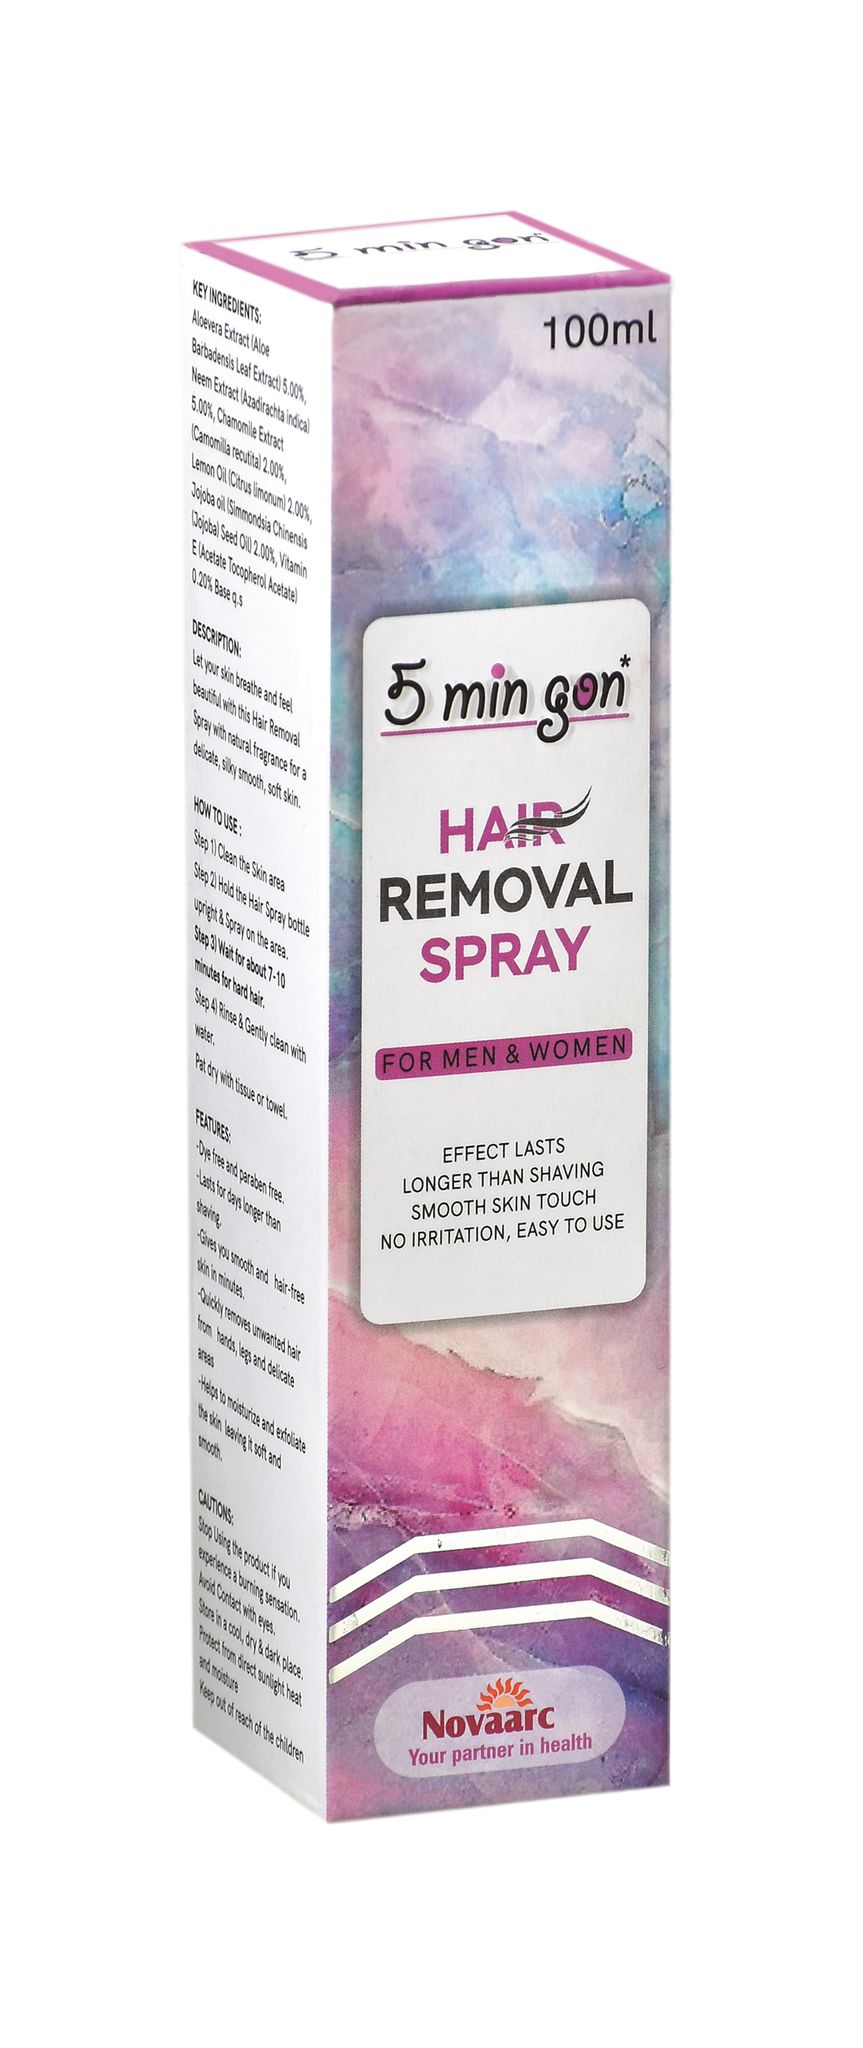 5 Min Gon Hair Removal Spray For Men & Women - Smooth Skin Touch-No Irritation (Pack Of 1) Spray